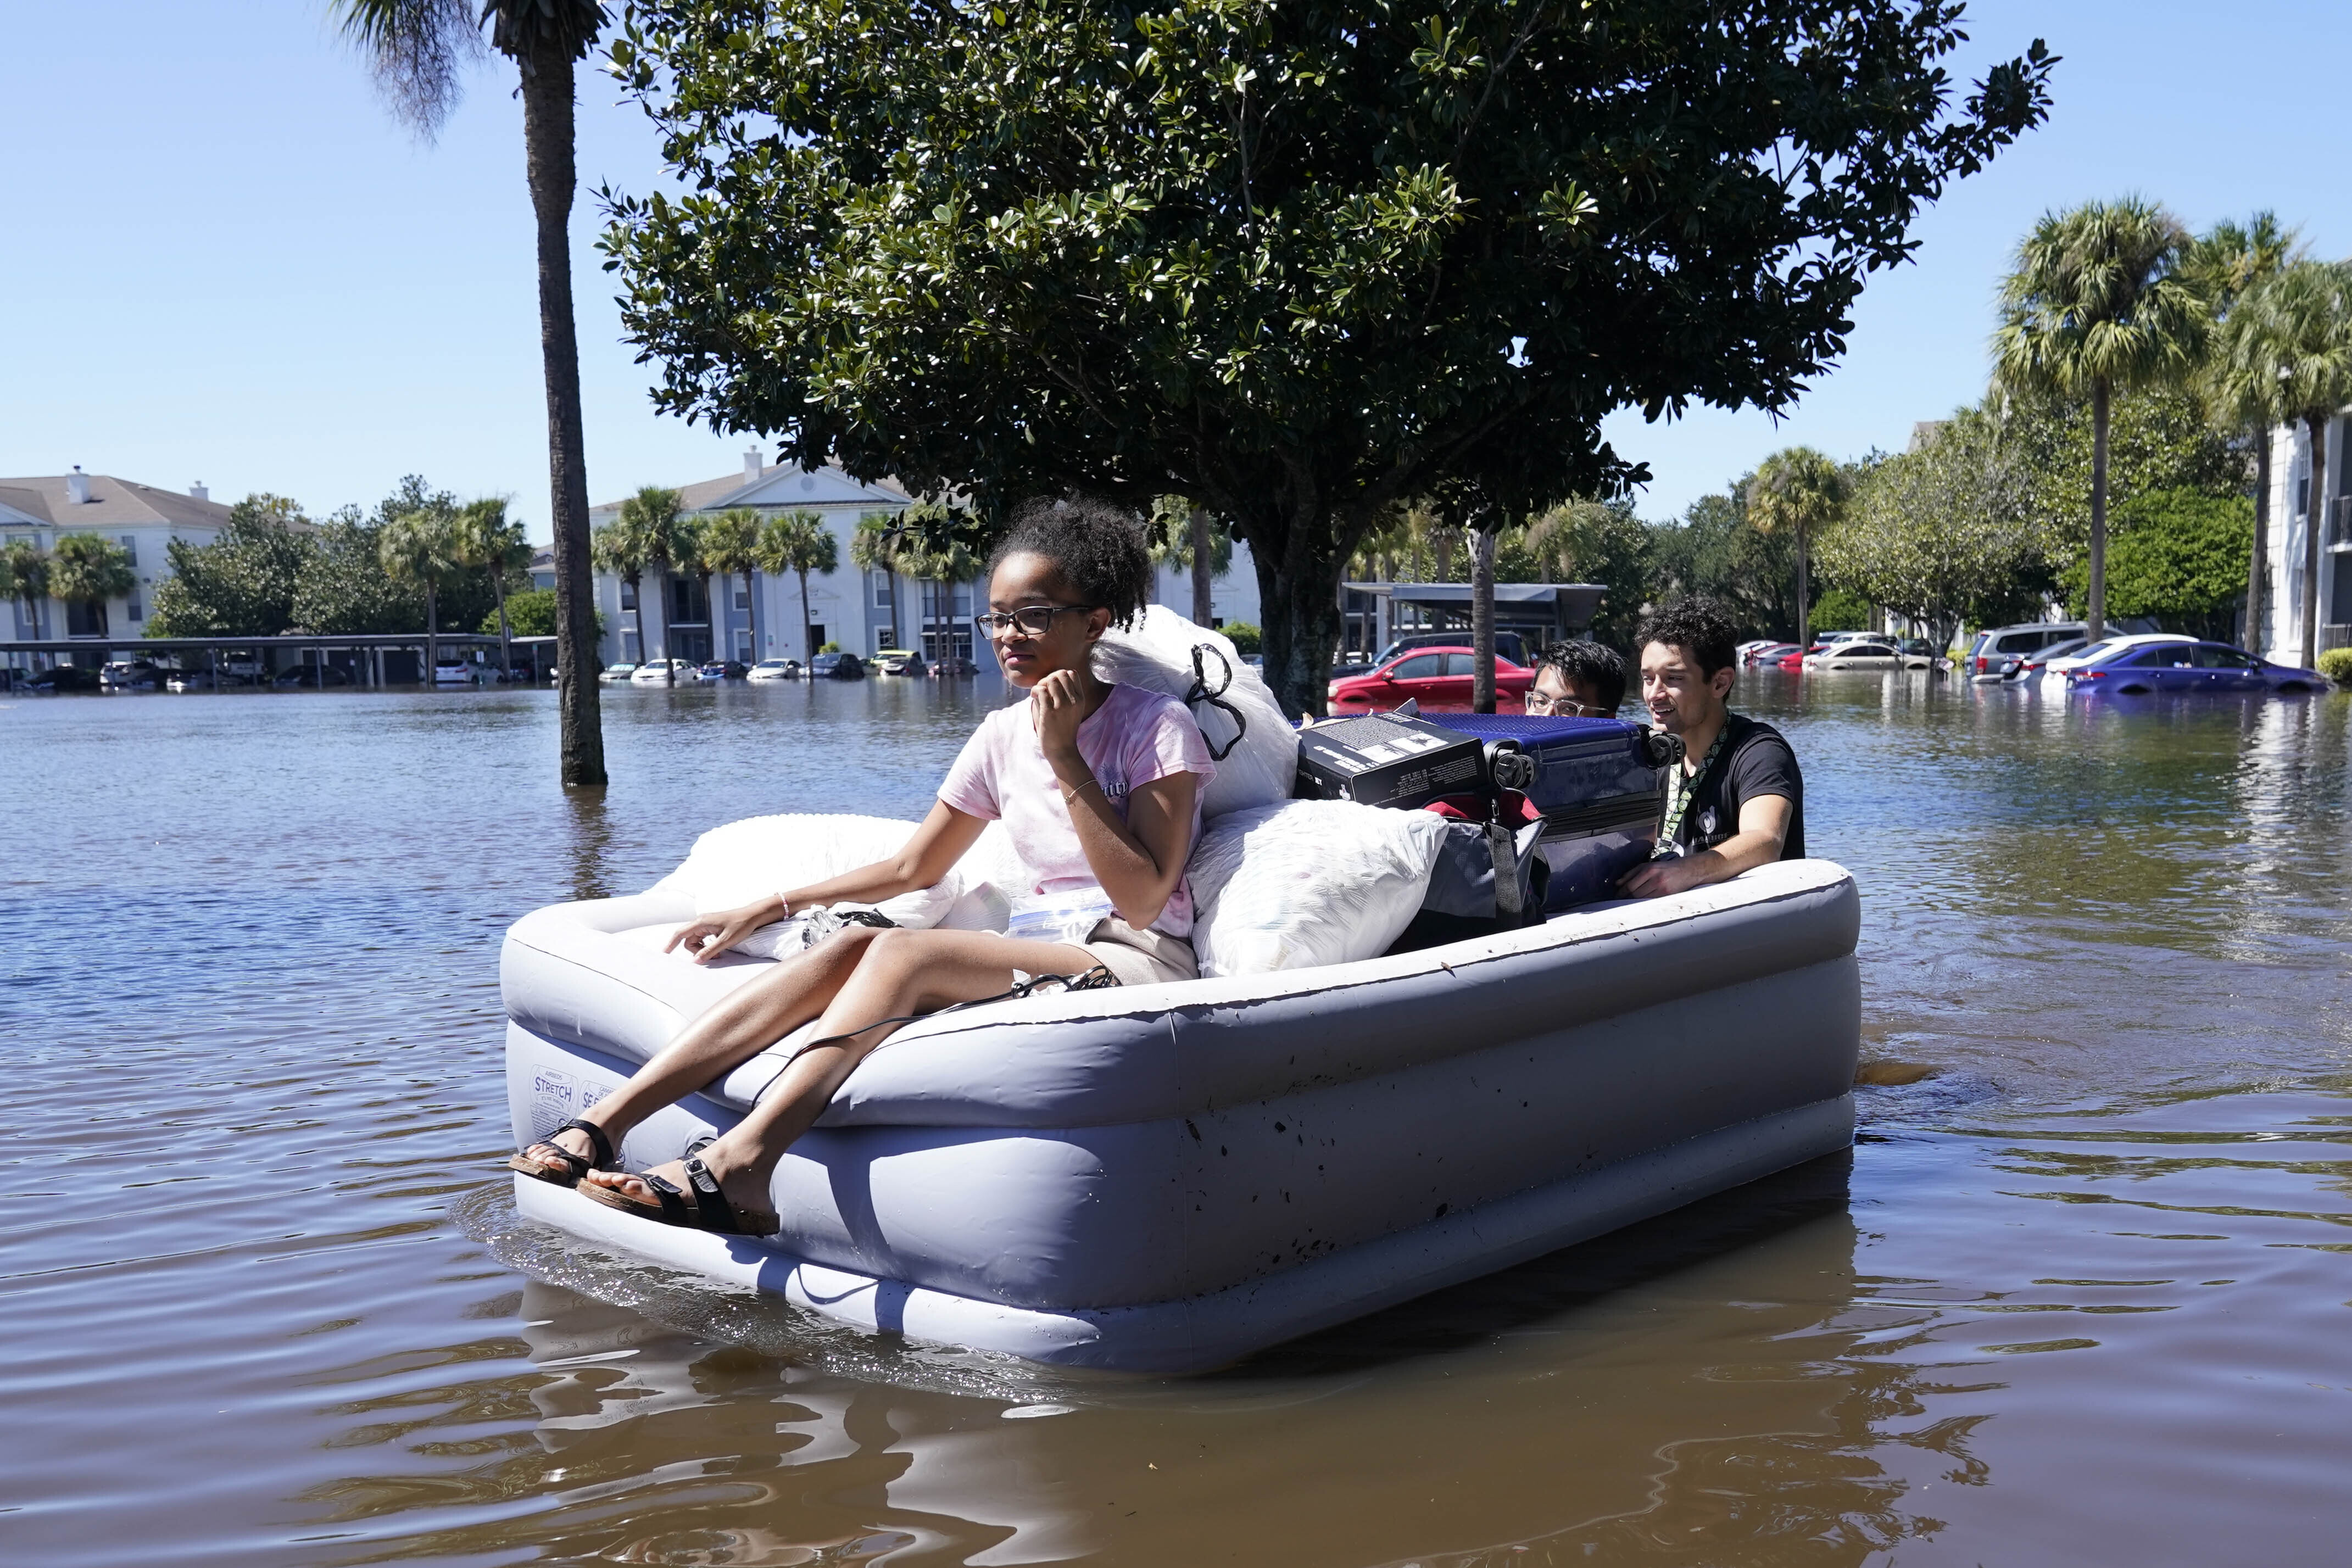 University of Central Florida students use an inflatable mattress as they evacuate an apartment complex near the campus that was totally flooded by rain from Hurricane Ian, Friday, September 30, 2022, in Orlando, Florida